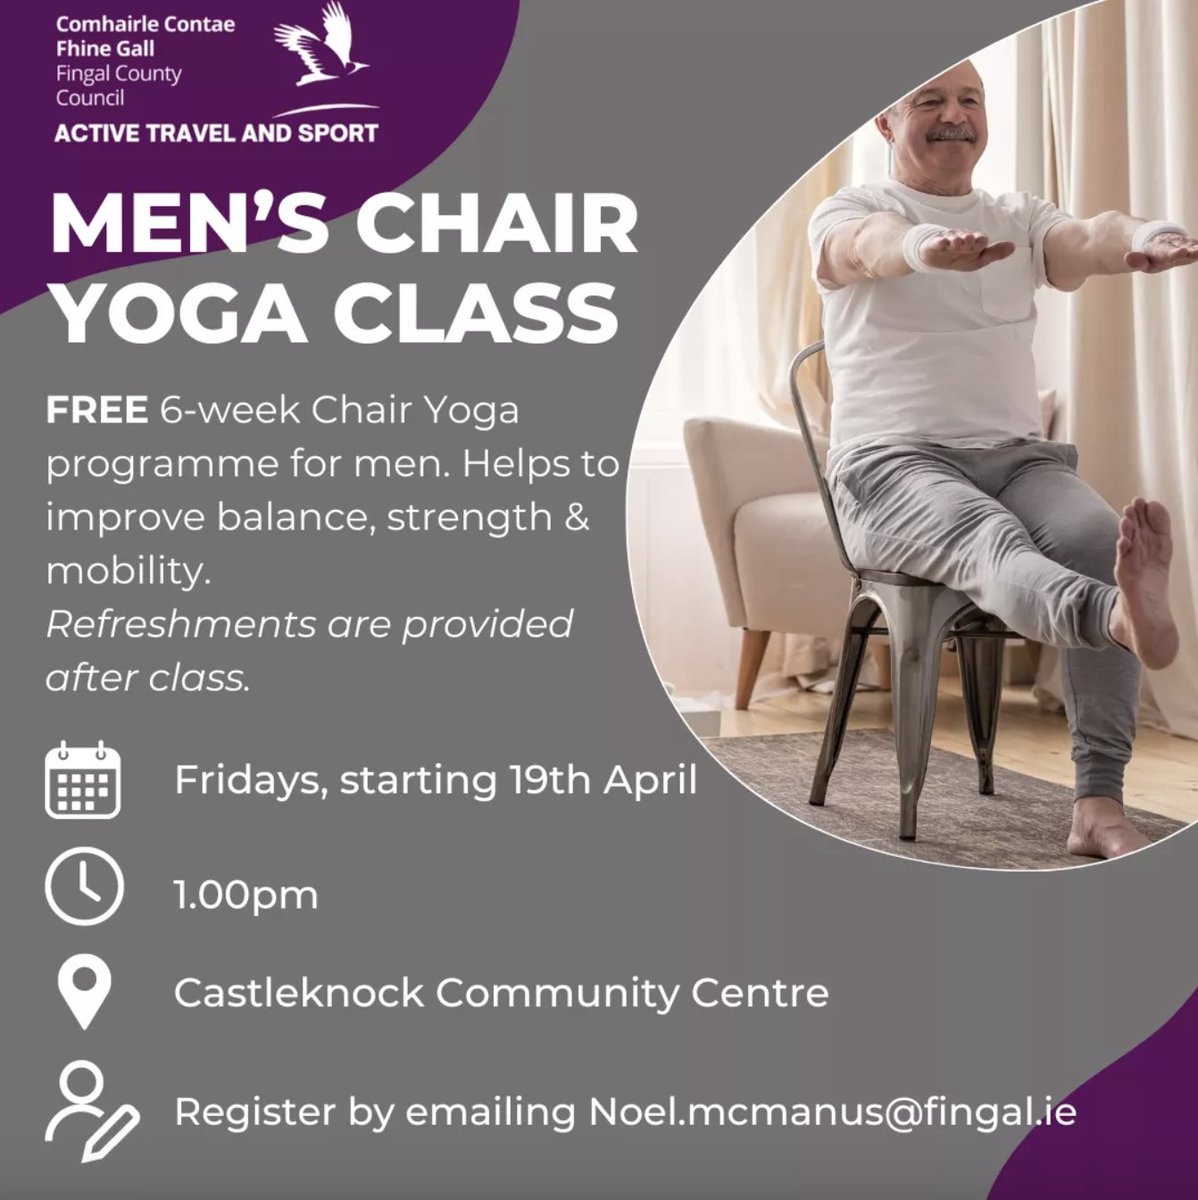 Men's Chair Yoga Class Free 6-week chair yoga programme for men. Helps to improve balance, strength, & mobility! 📍 Location: Castleknock Community Centre 🗓️ Date: Friday, 19th April 🕐 Duration: six weeks ay 1pm Register: bit.ly/ChairYogaCastl… email: noel.mcmanus@fingal.ie